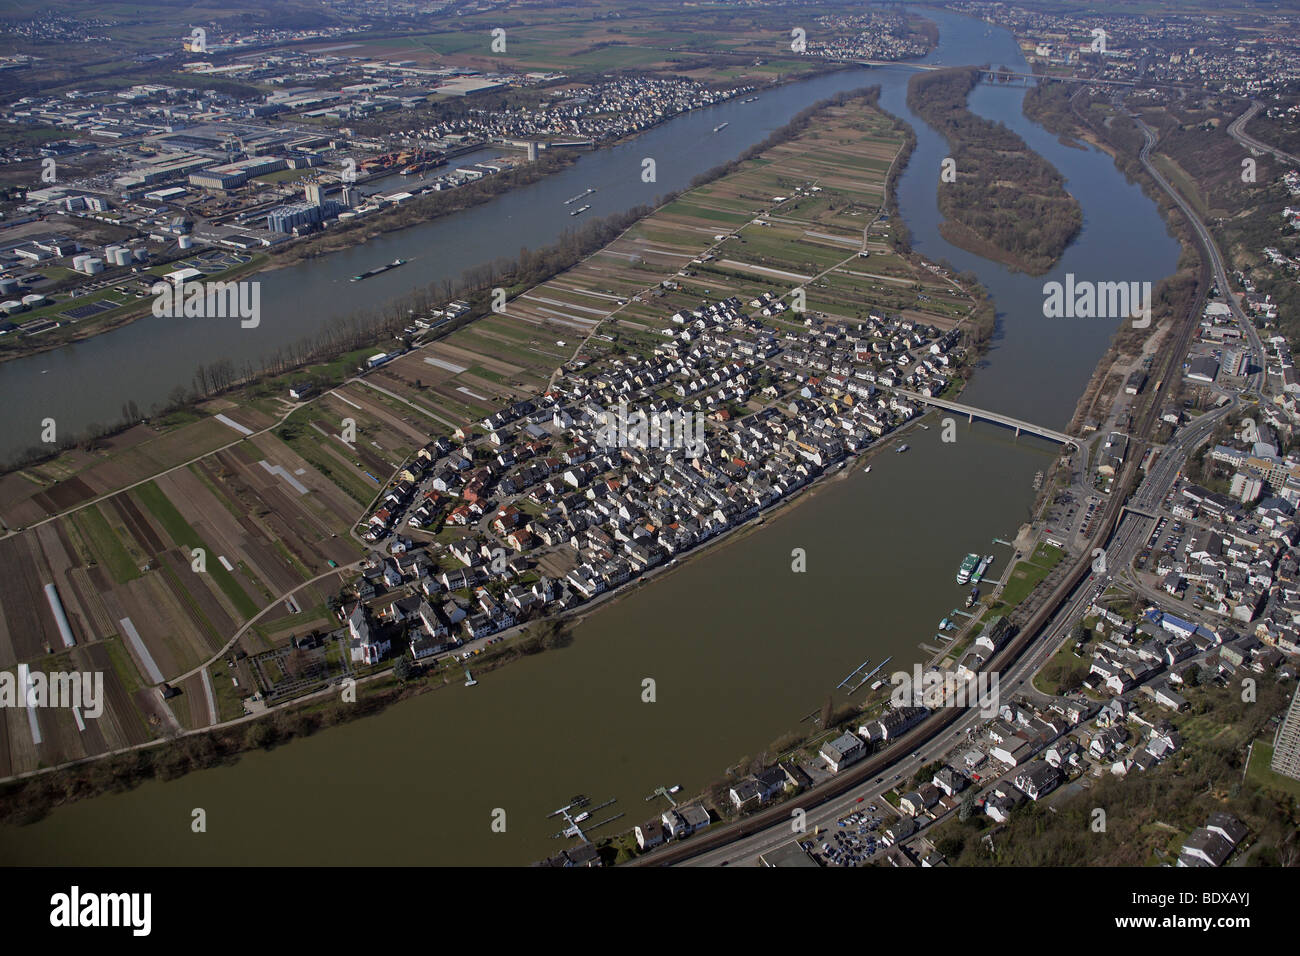 Aerial view, village of Niederwerth located on an island in the river Rhine, Rhineland-Palatinate, Germany, Europe Stock Photo